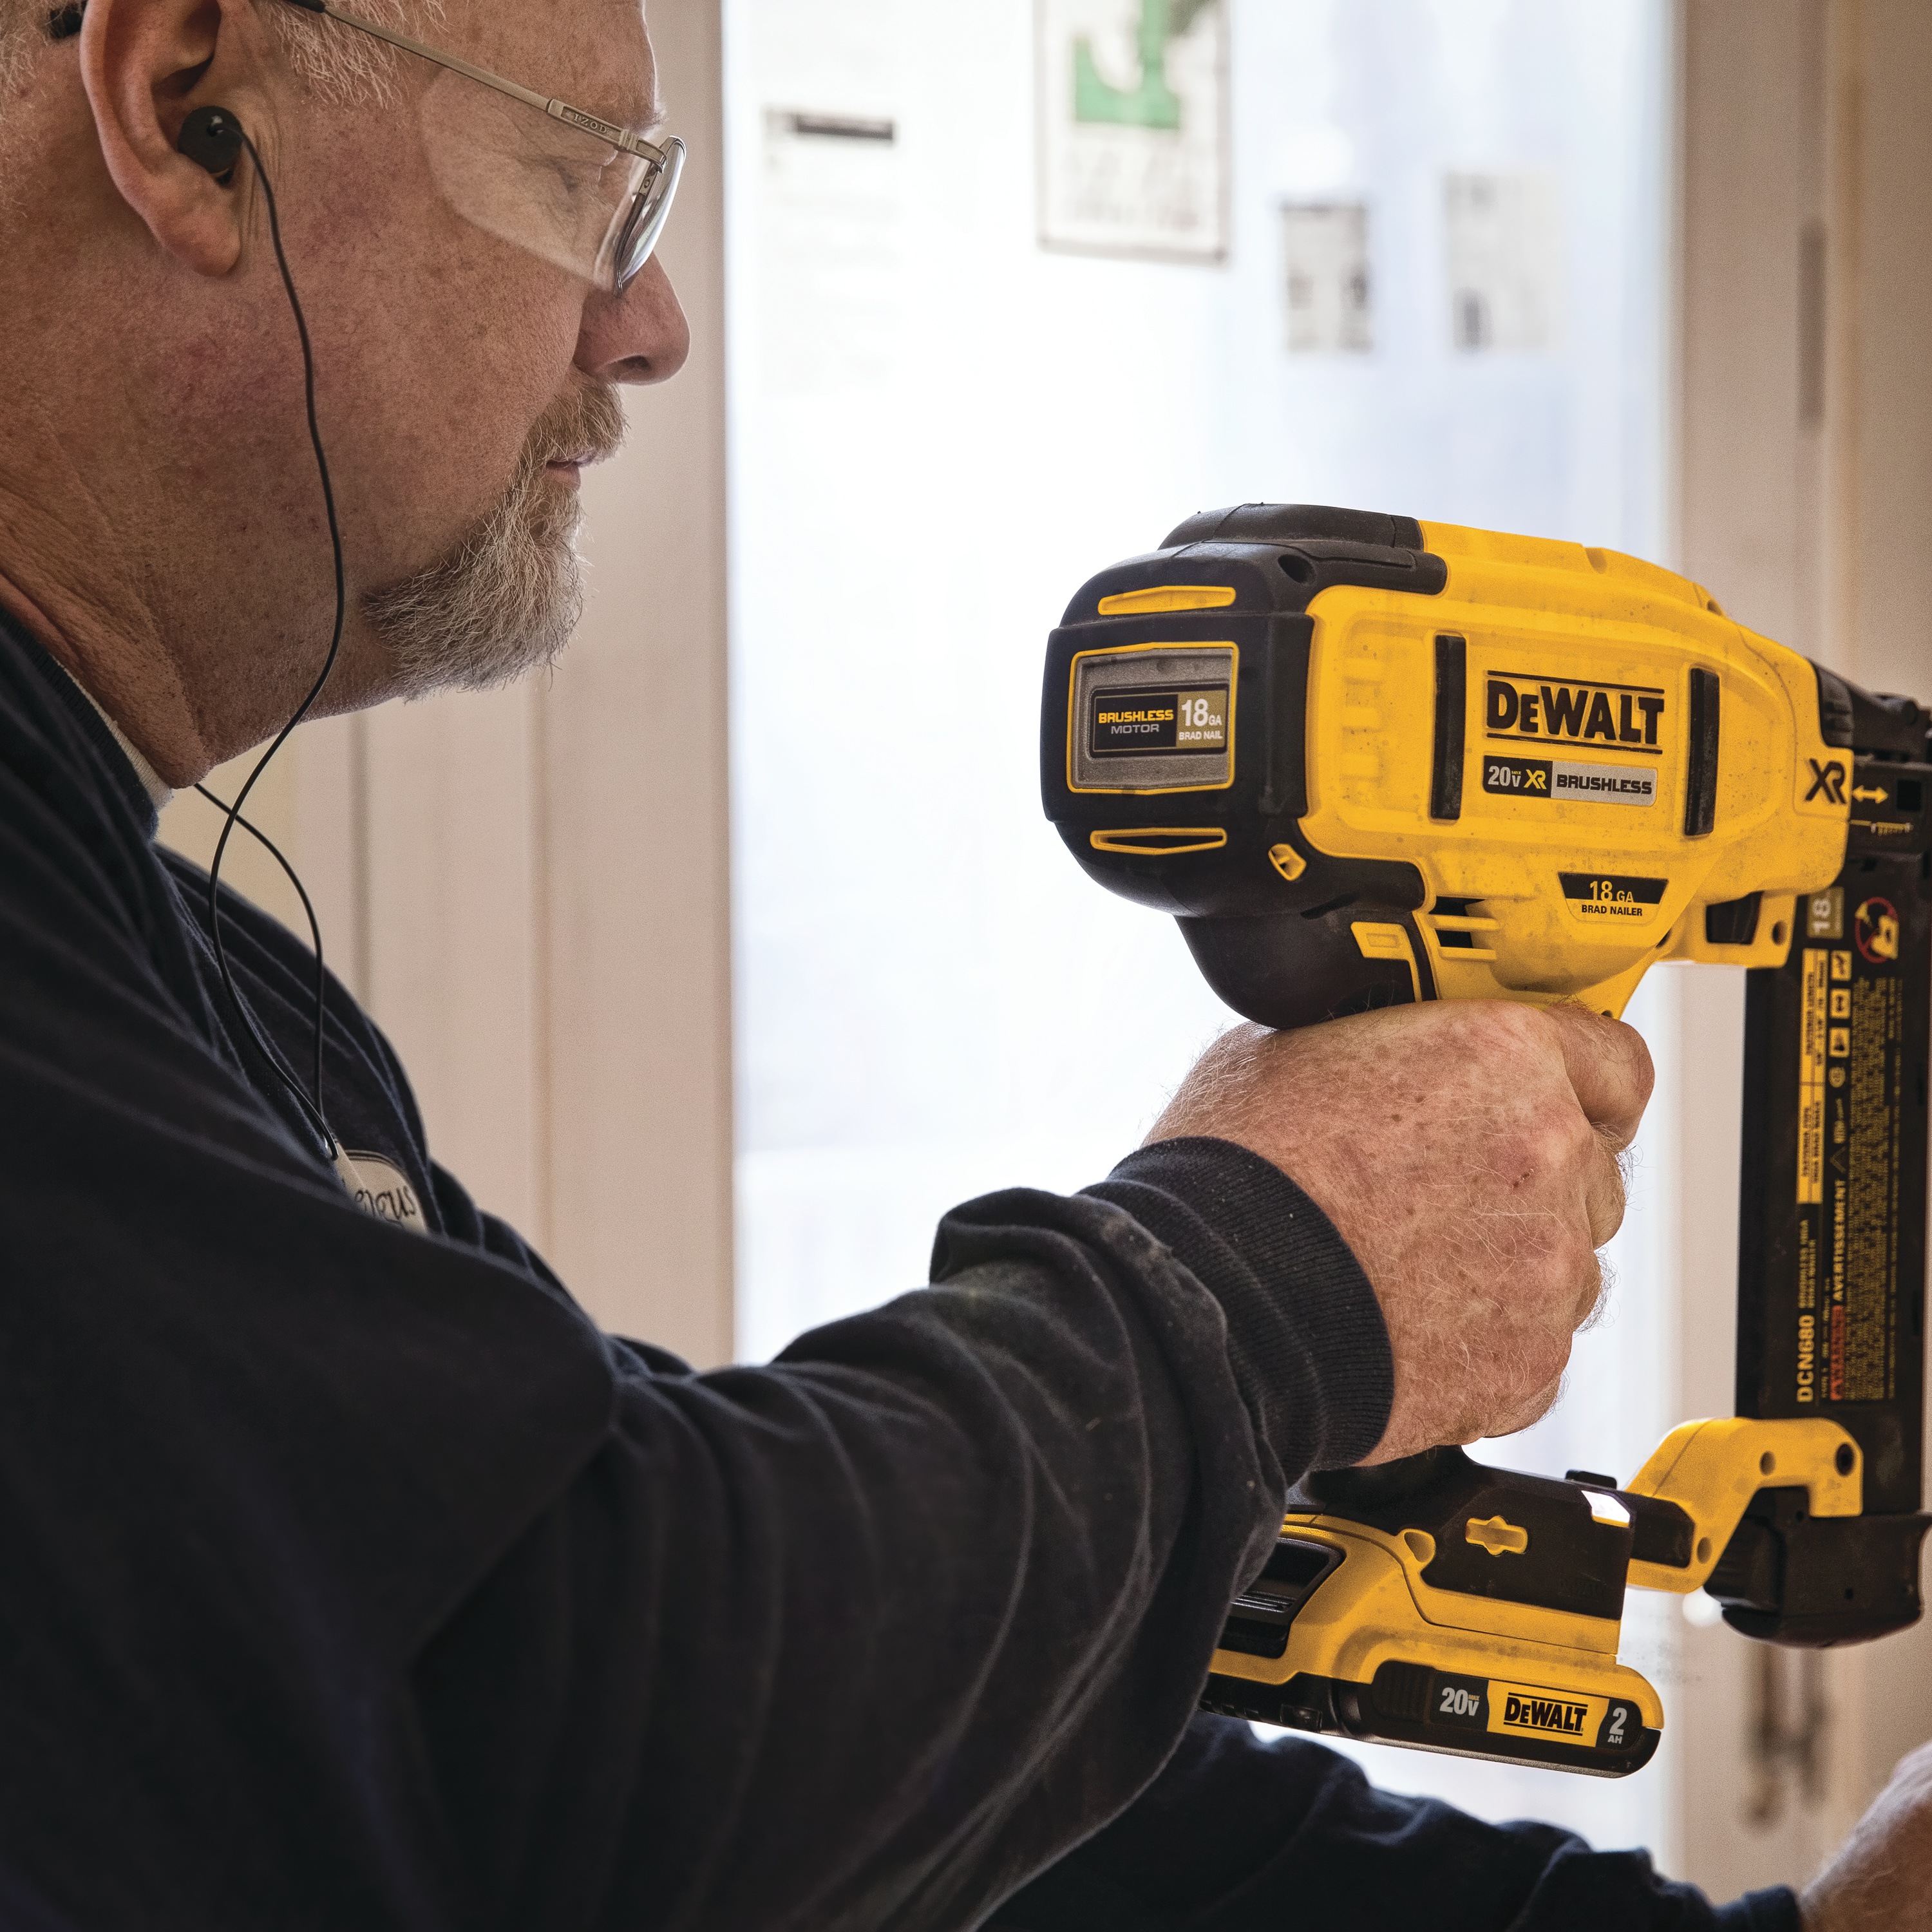 XR 18 gauge Cordless Brad Nailer in action by a construction worker on frame